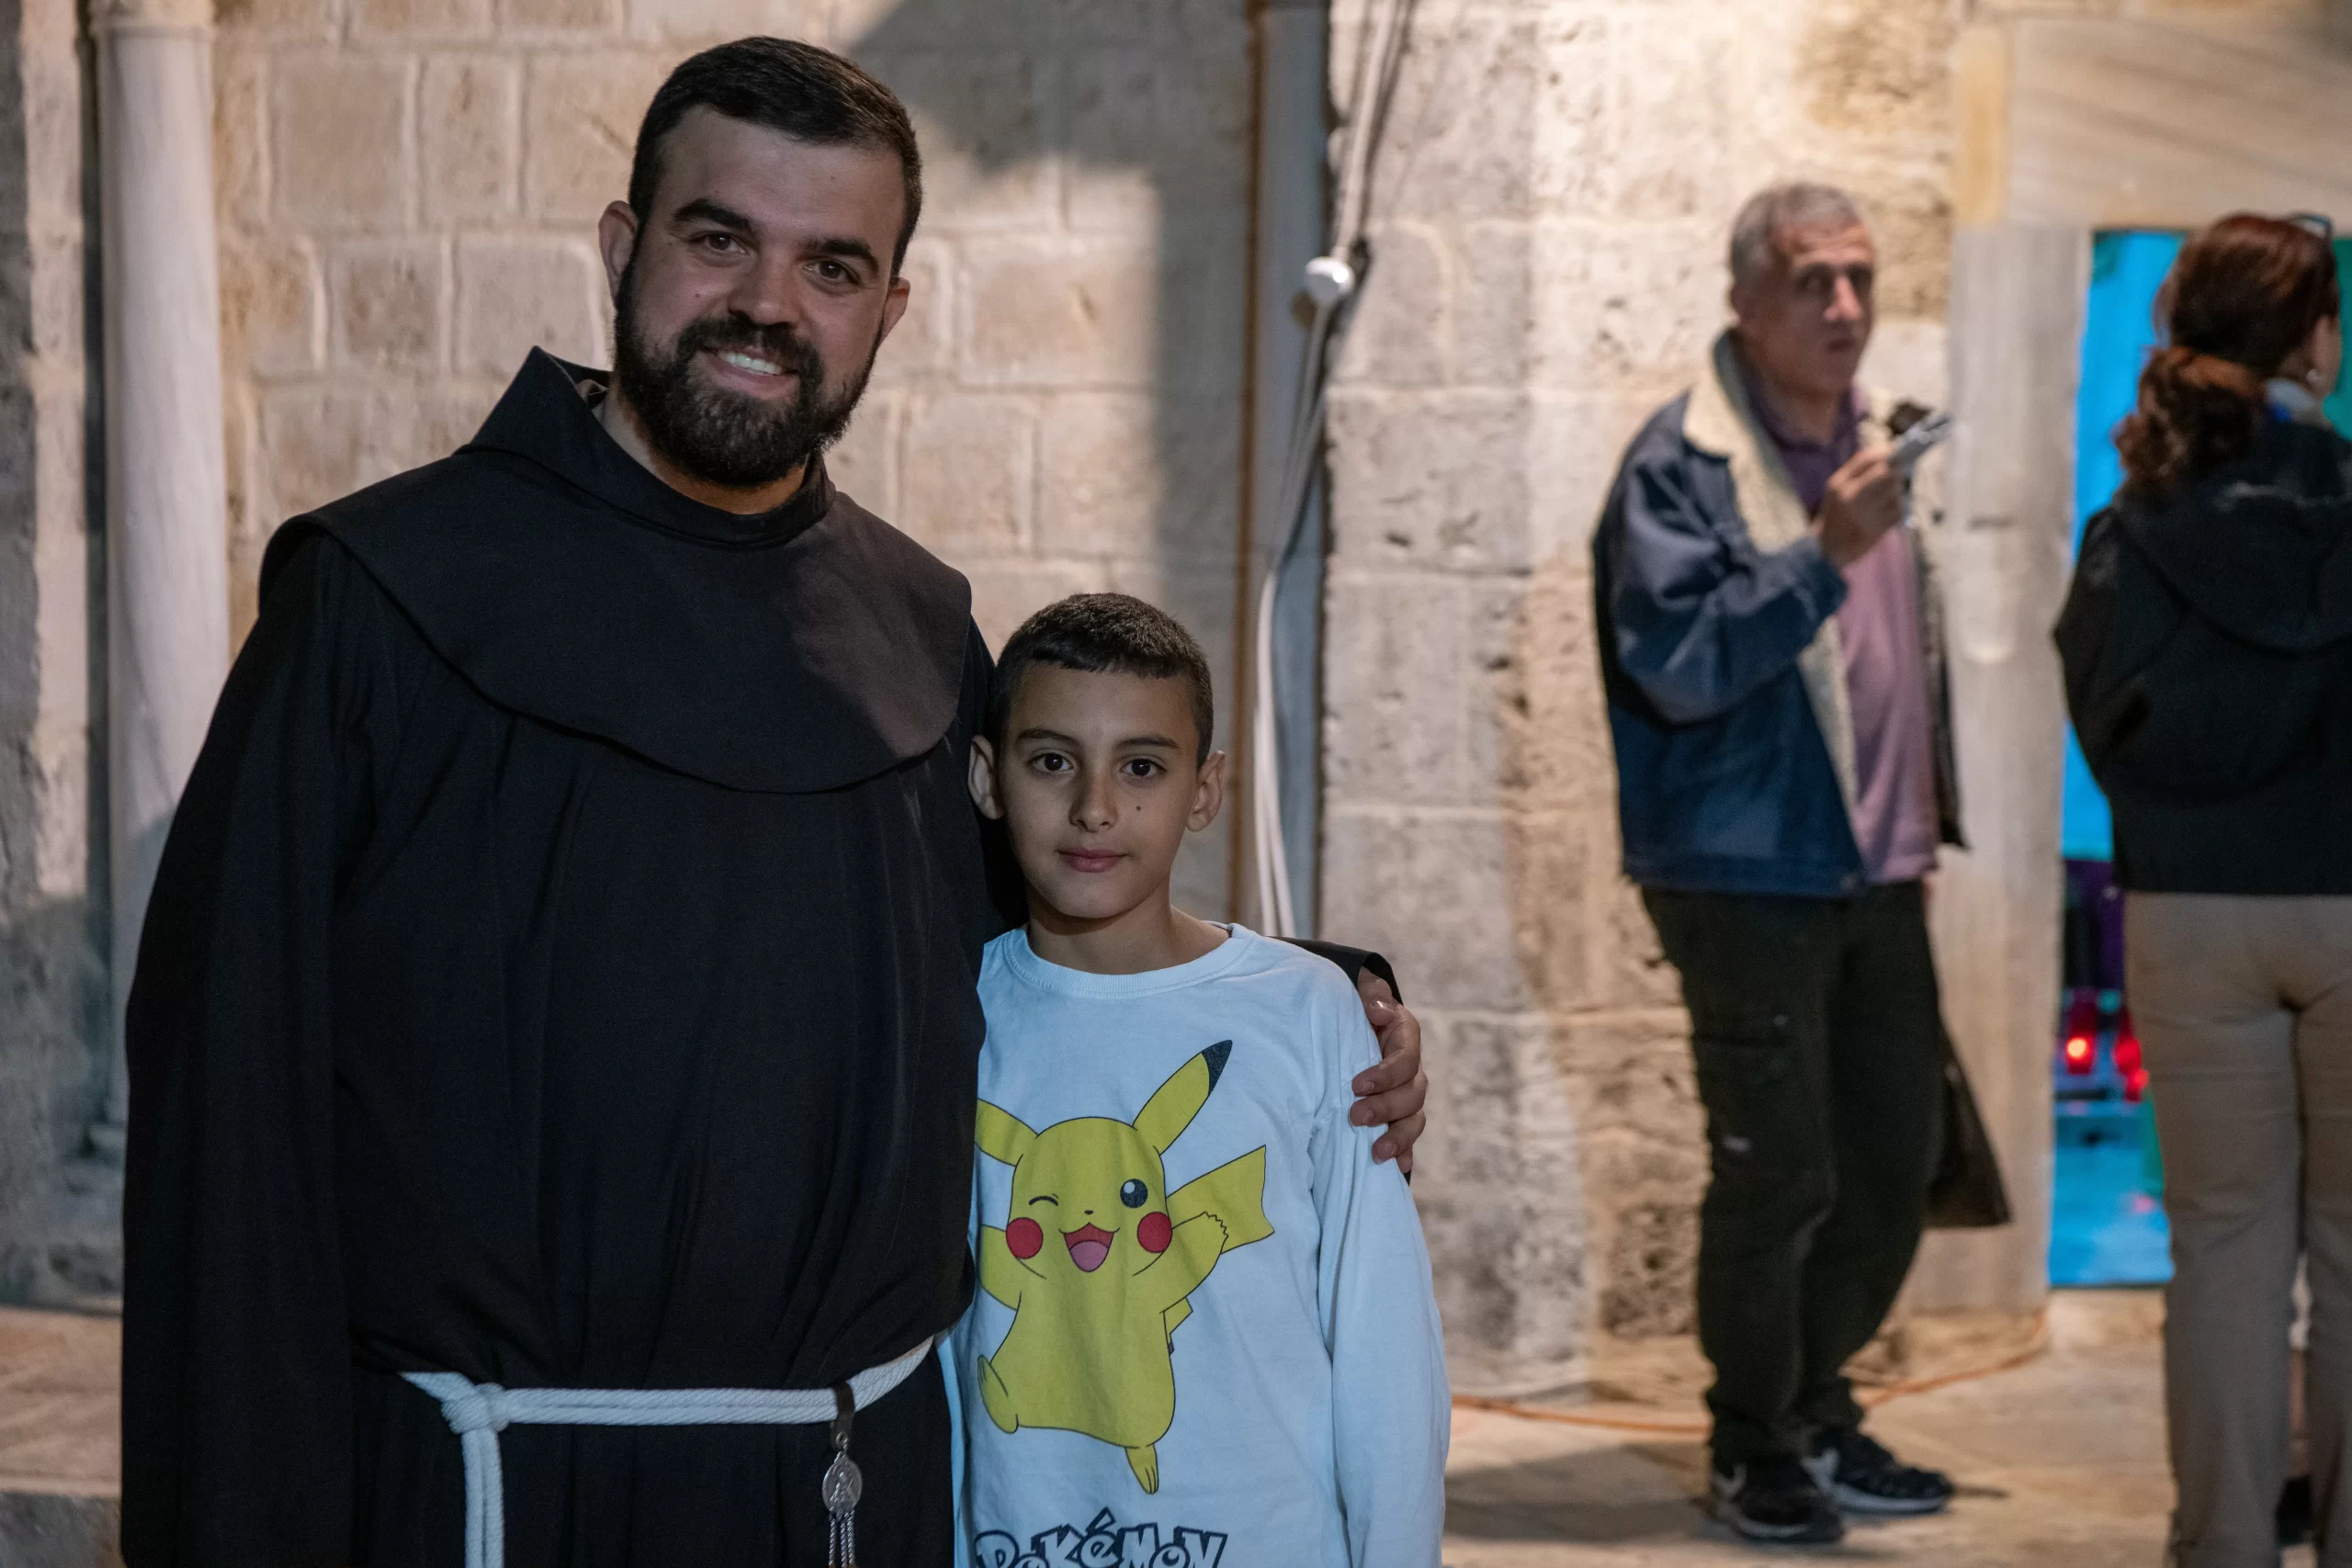 Brother Noor Amash, a Franciscan friar of the Custody of the Holy Land, together with George Sammour, one of the altar boys serving in the Latin parish of Jerusalem. “I wanted to come here to learn more about the Ascension of Jesus. I want to know more about Jesus and His life,” Sammour told CNA. Credit: Marinella Bandini